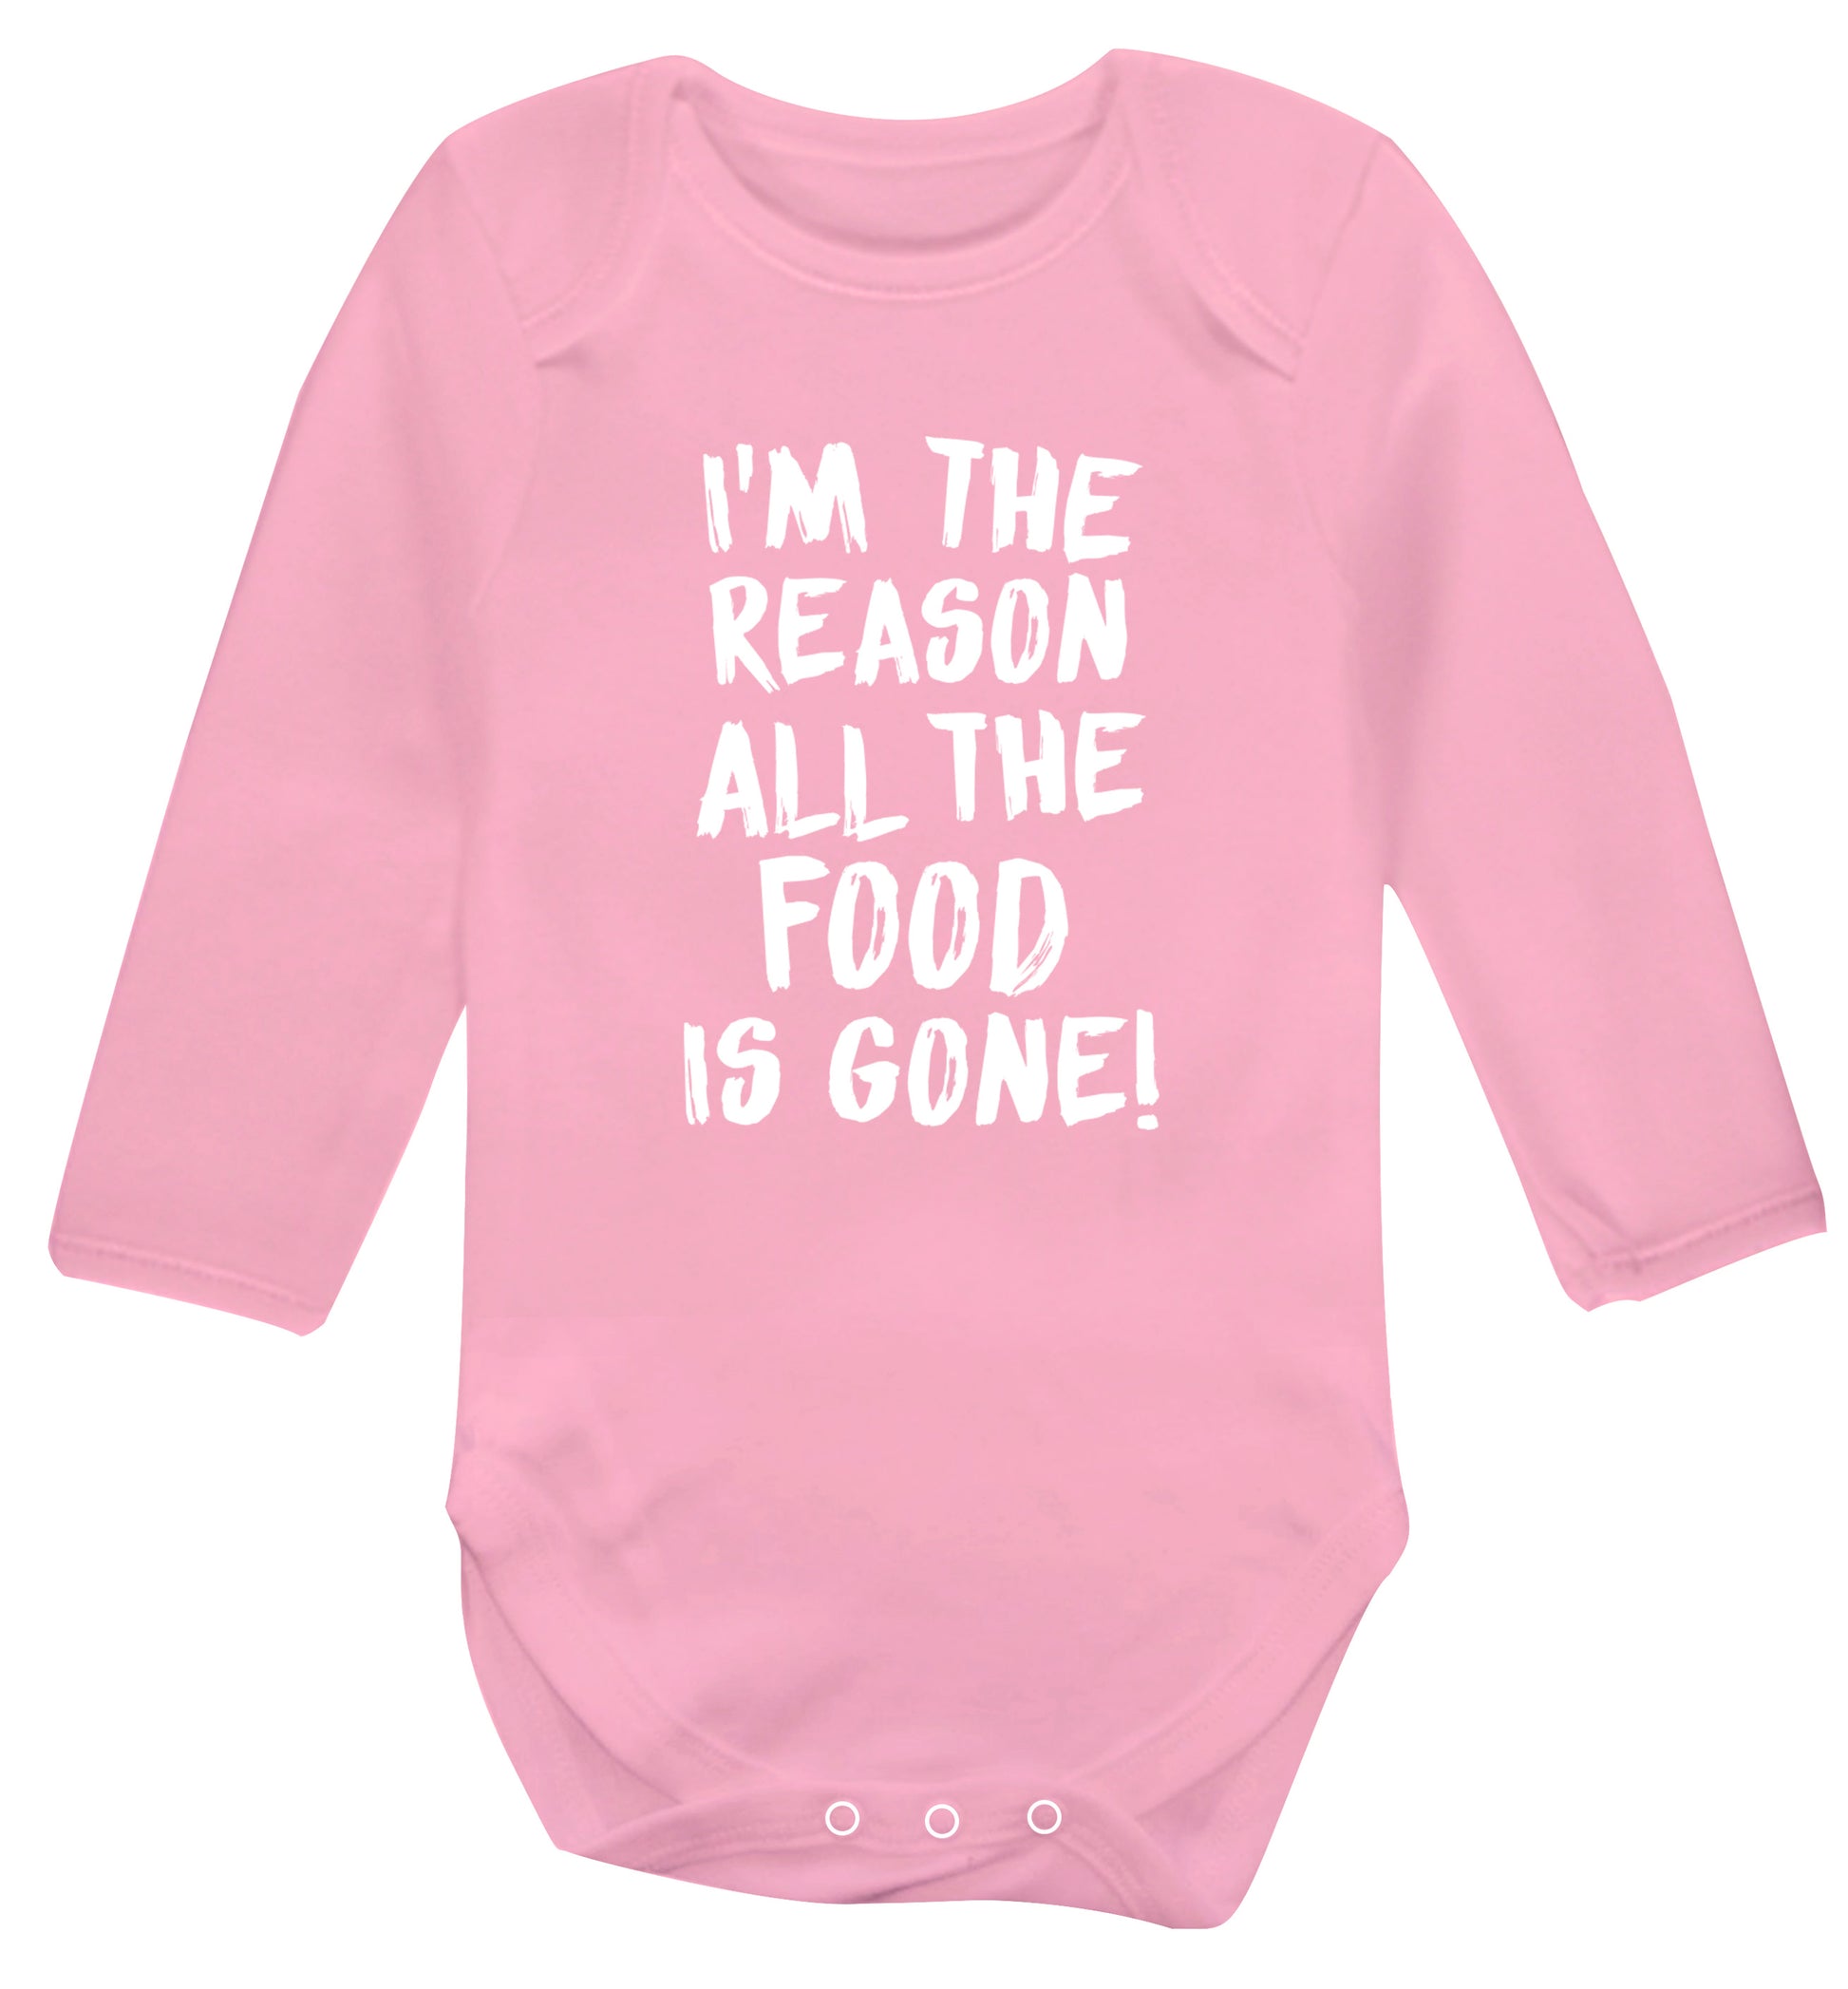 I'm the reason why all the food is gone Baby Vest long sleeved pale pink 6-12 months